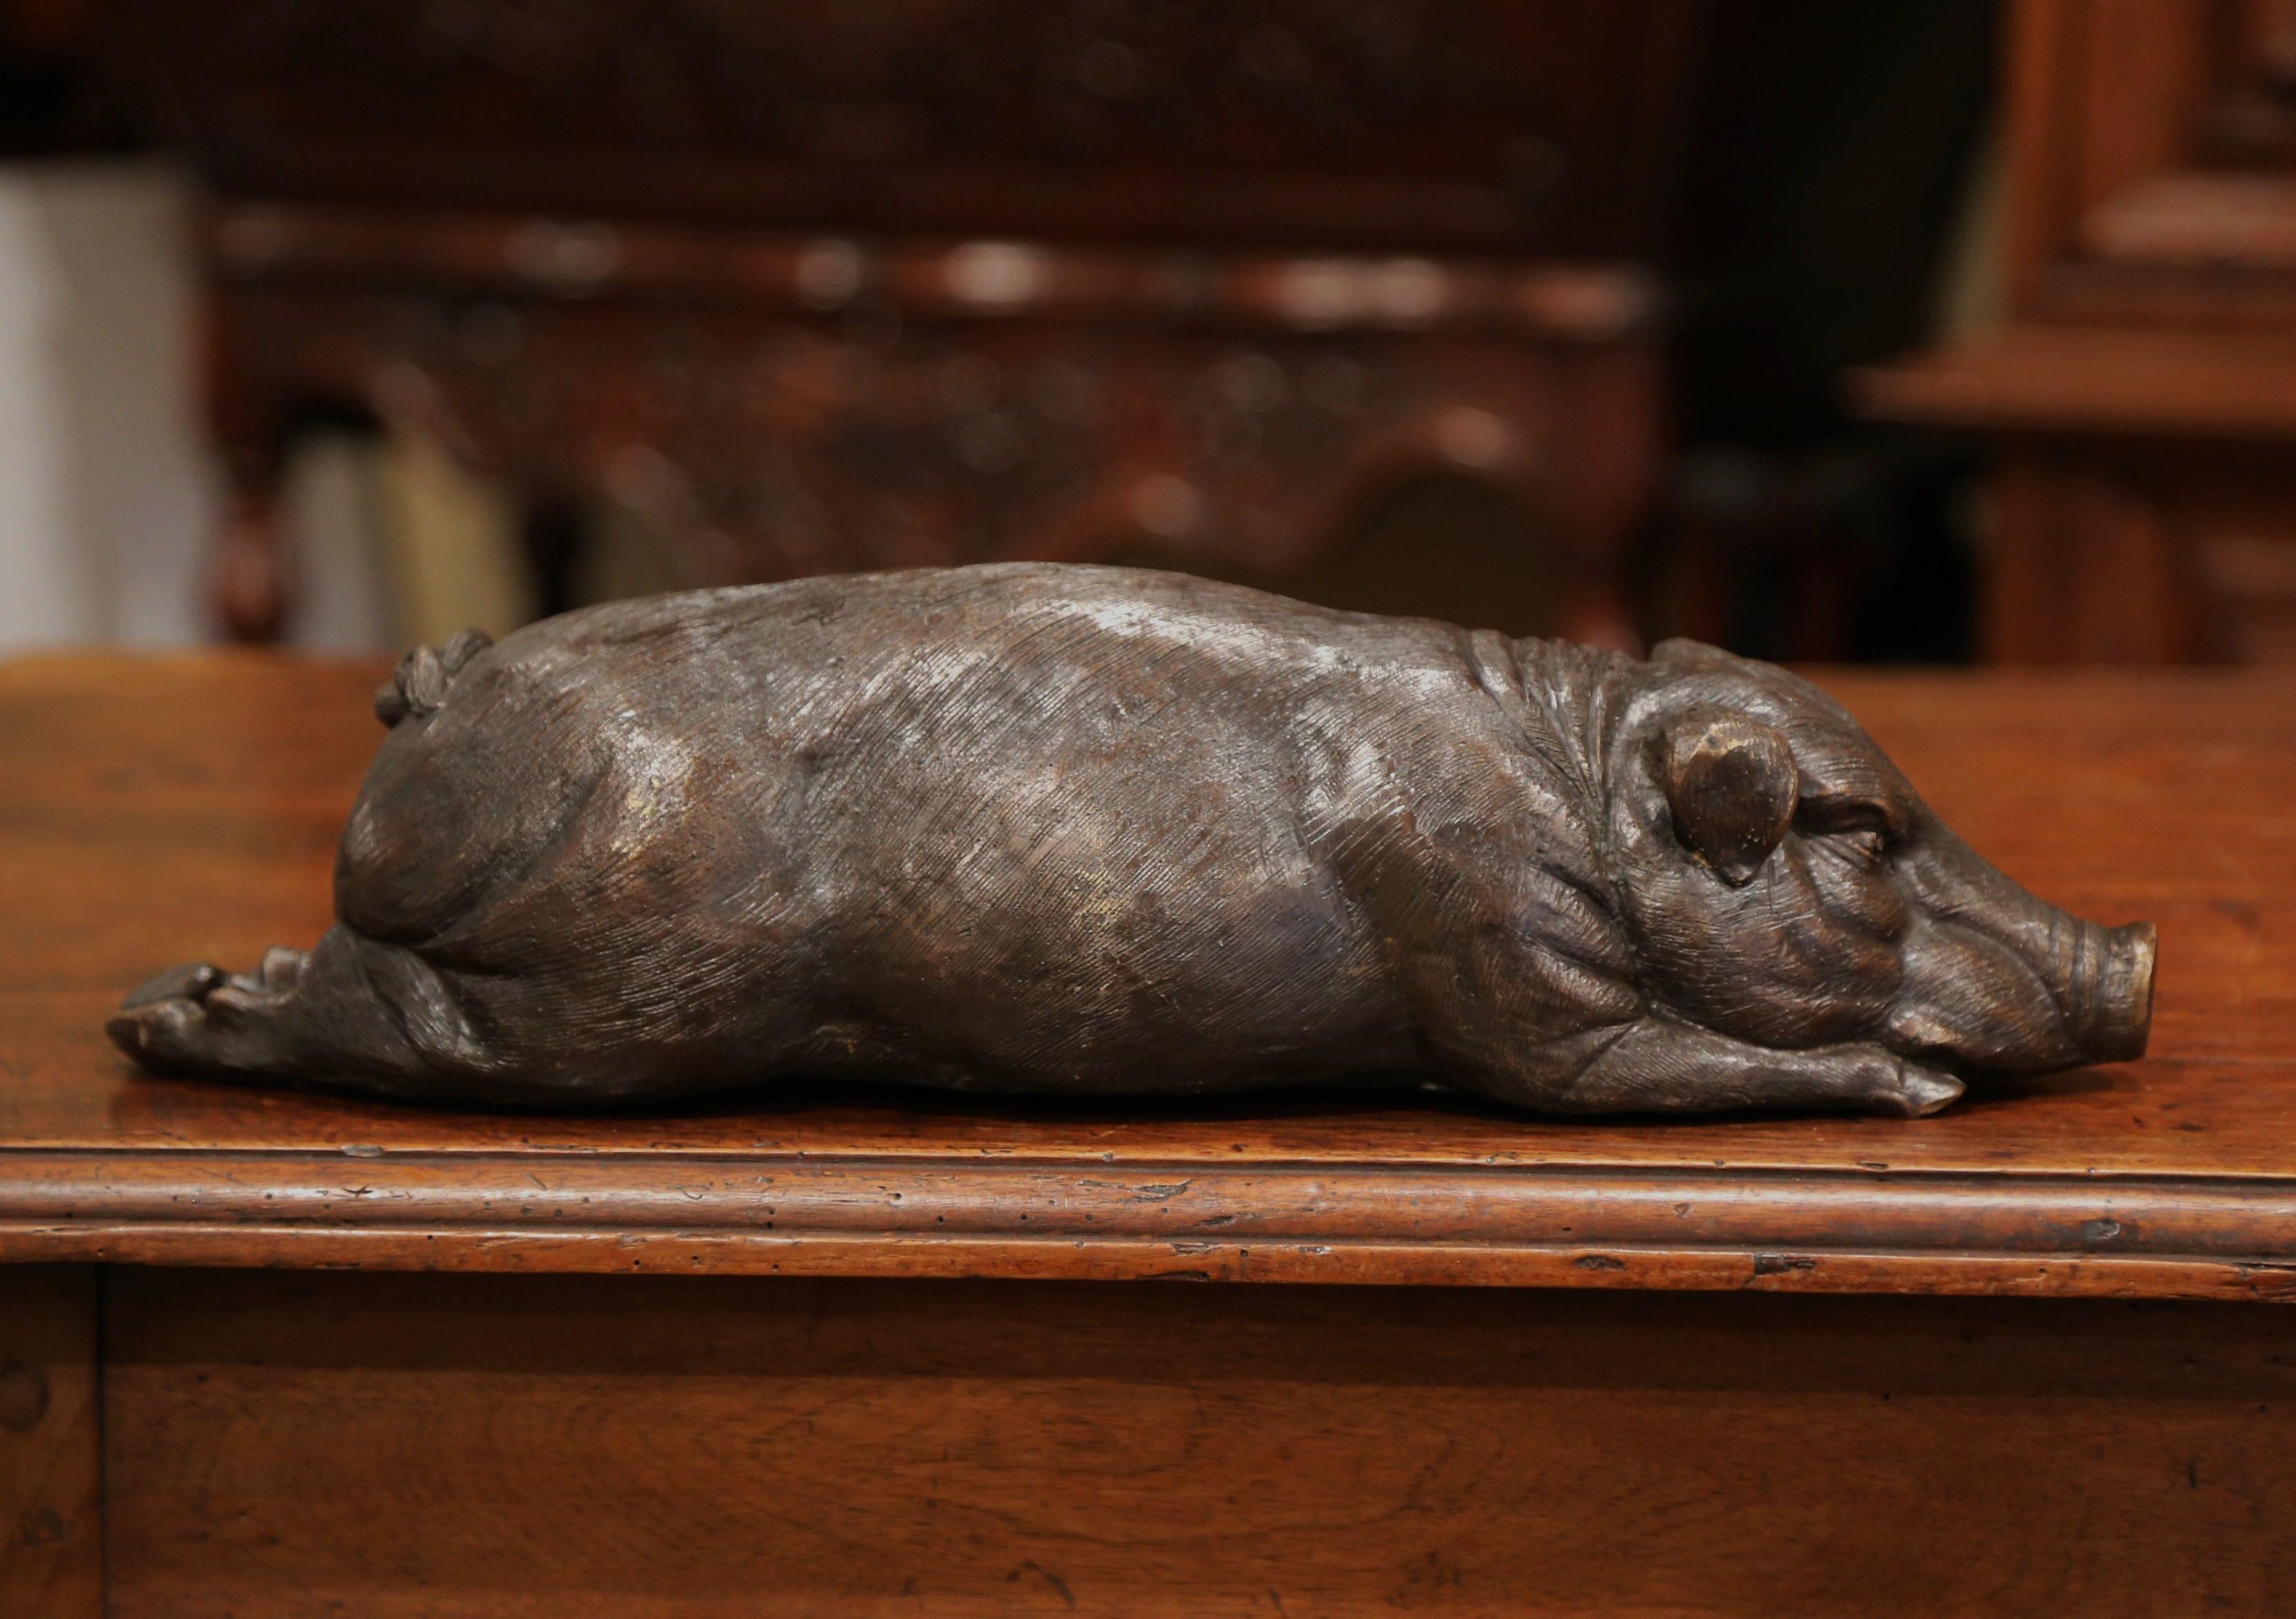 Crafted in France, circa 1920 and made of bronze, the large pig sculpture is shown taking a nap. The fun loving sculpture features wonderful details and is in excellent condition with a rich patinated finish. Place this sculpture on a kitchen